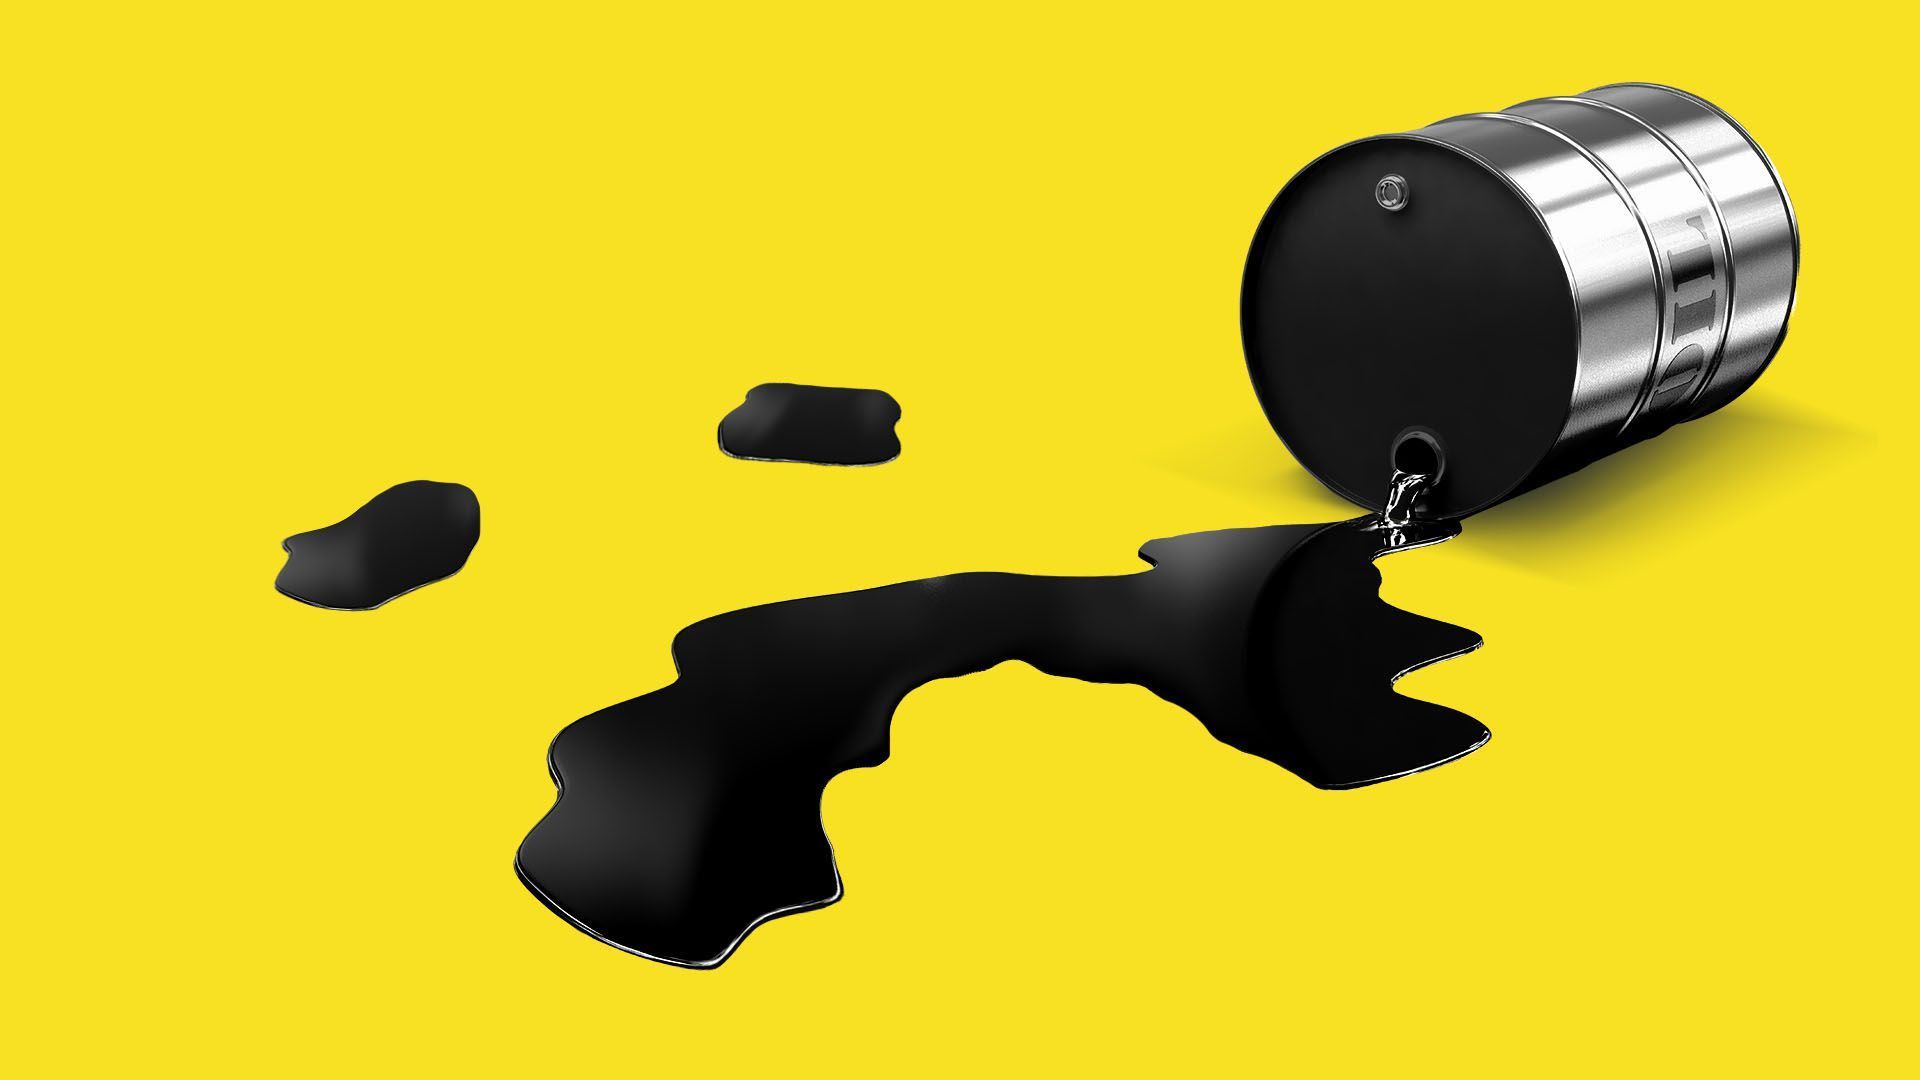 An illustration of an oil tank that has been tipped over and oil is spilling out of it. A yellow background.